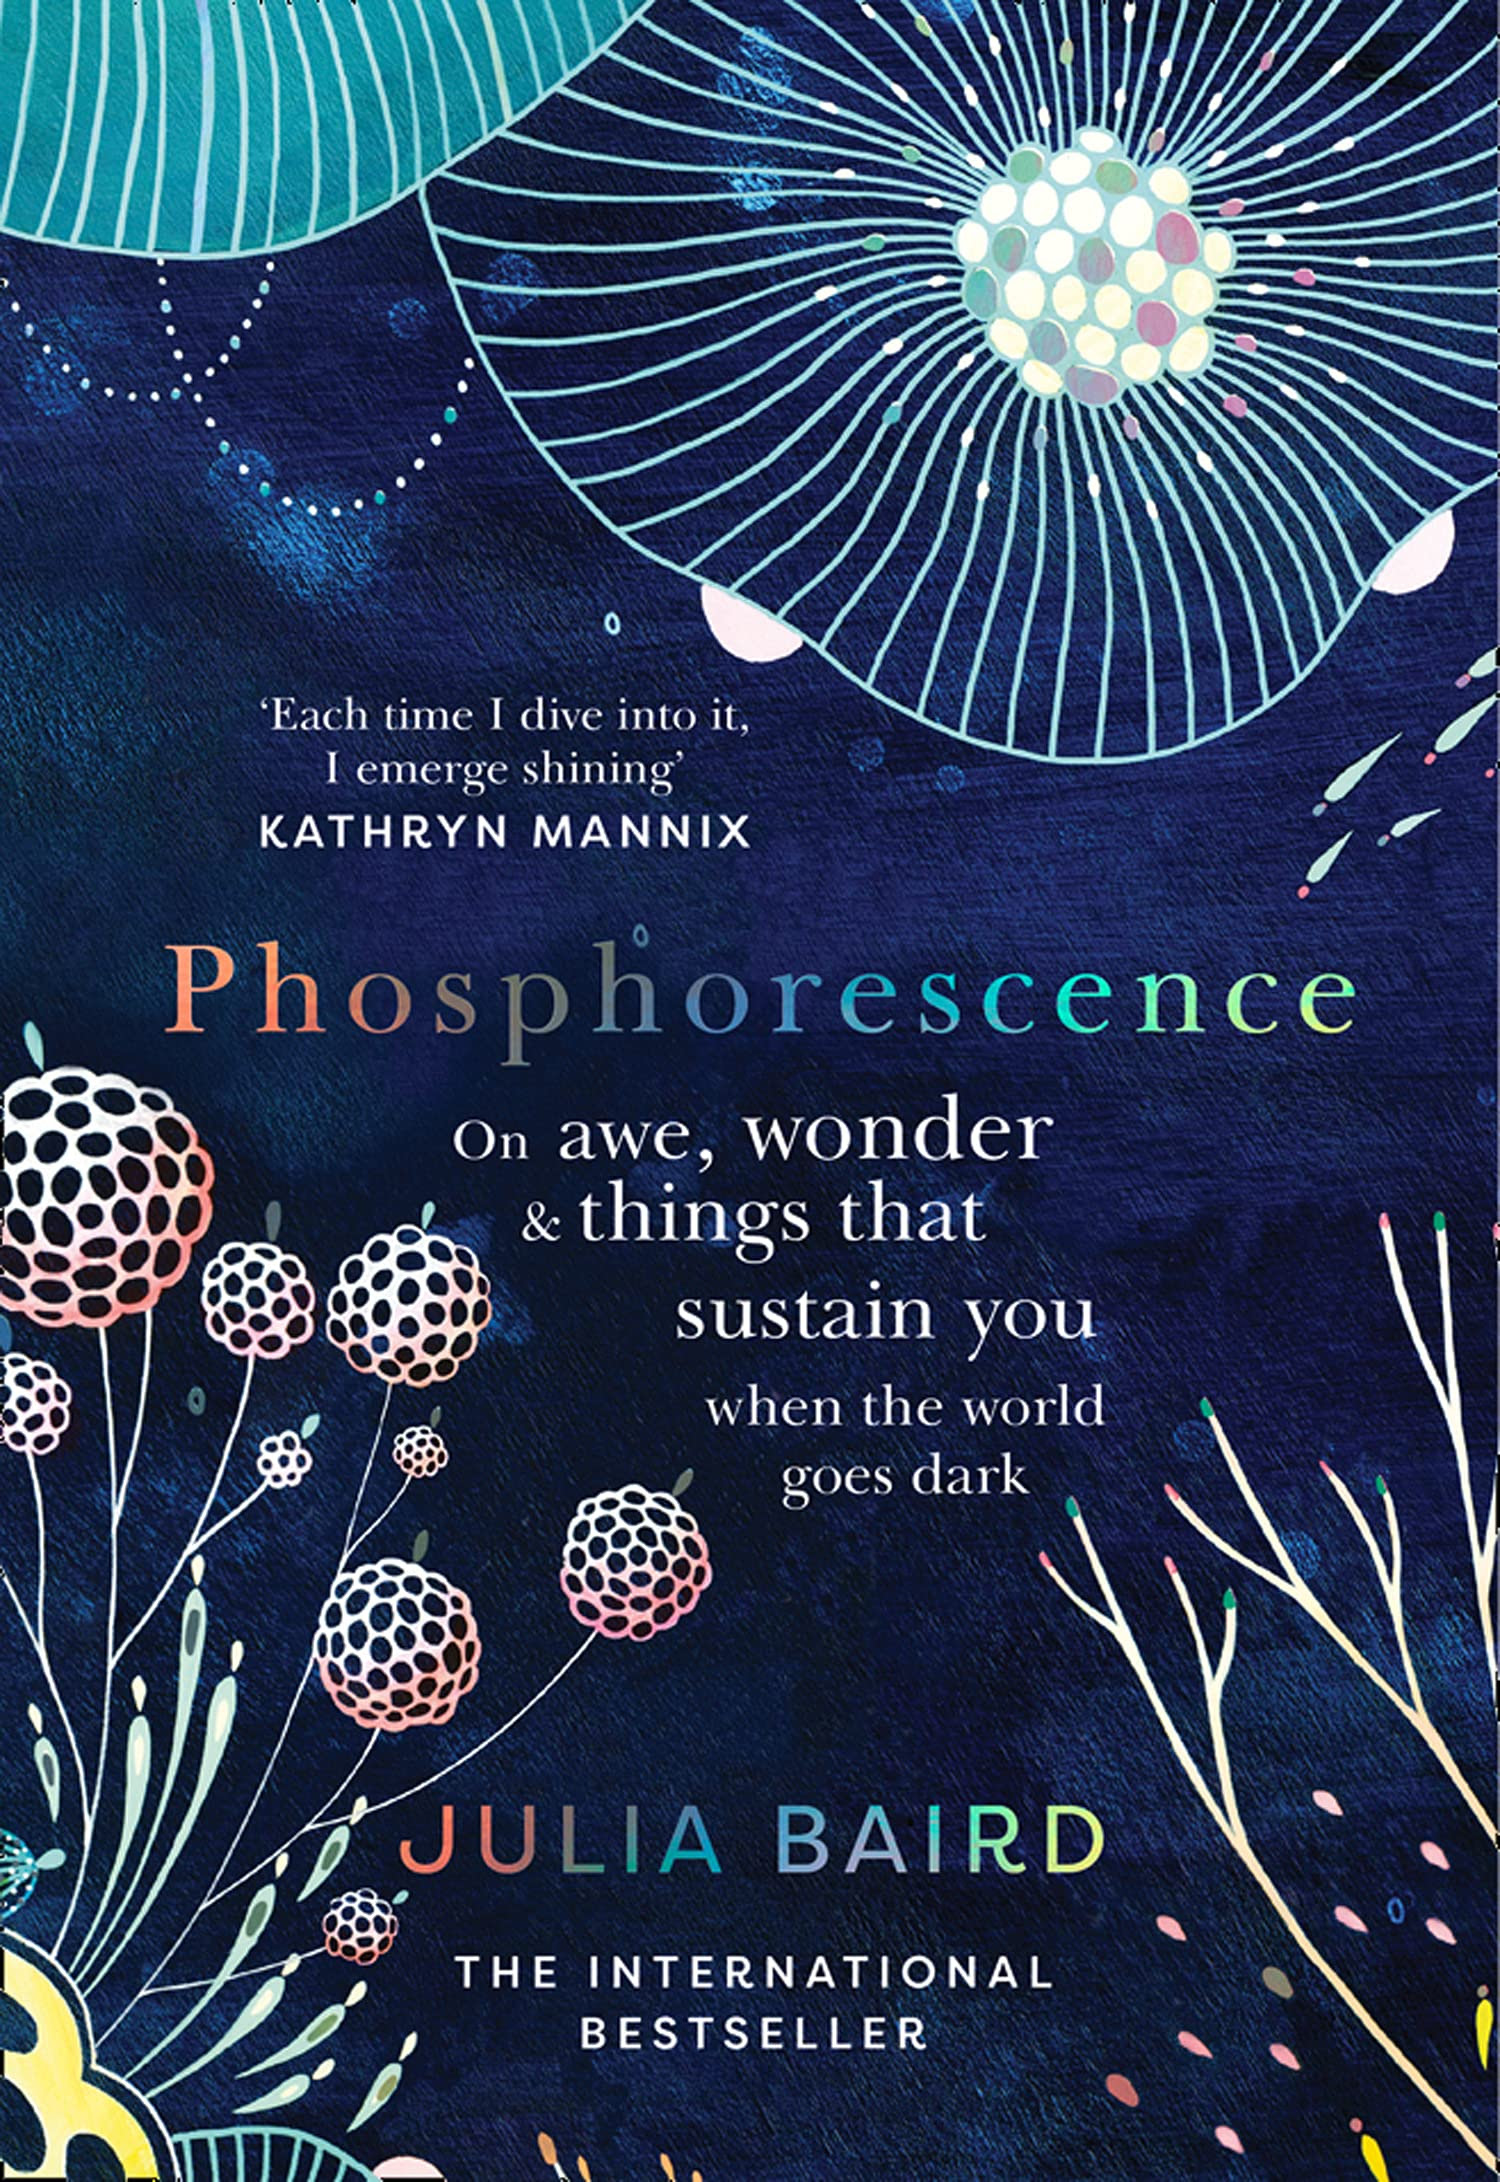 Phosphorescence: On Awe, Wonder and Things That Sustain You When the World Goes Dark in Kindle/PDF/EPUB